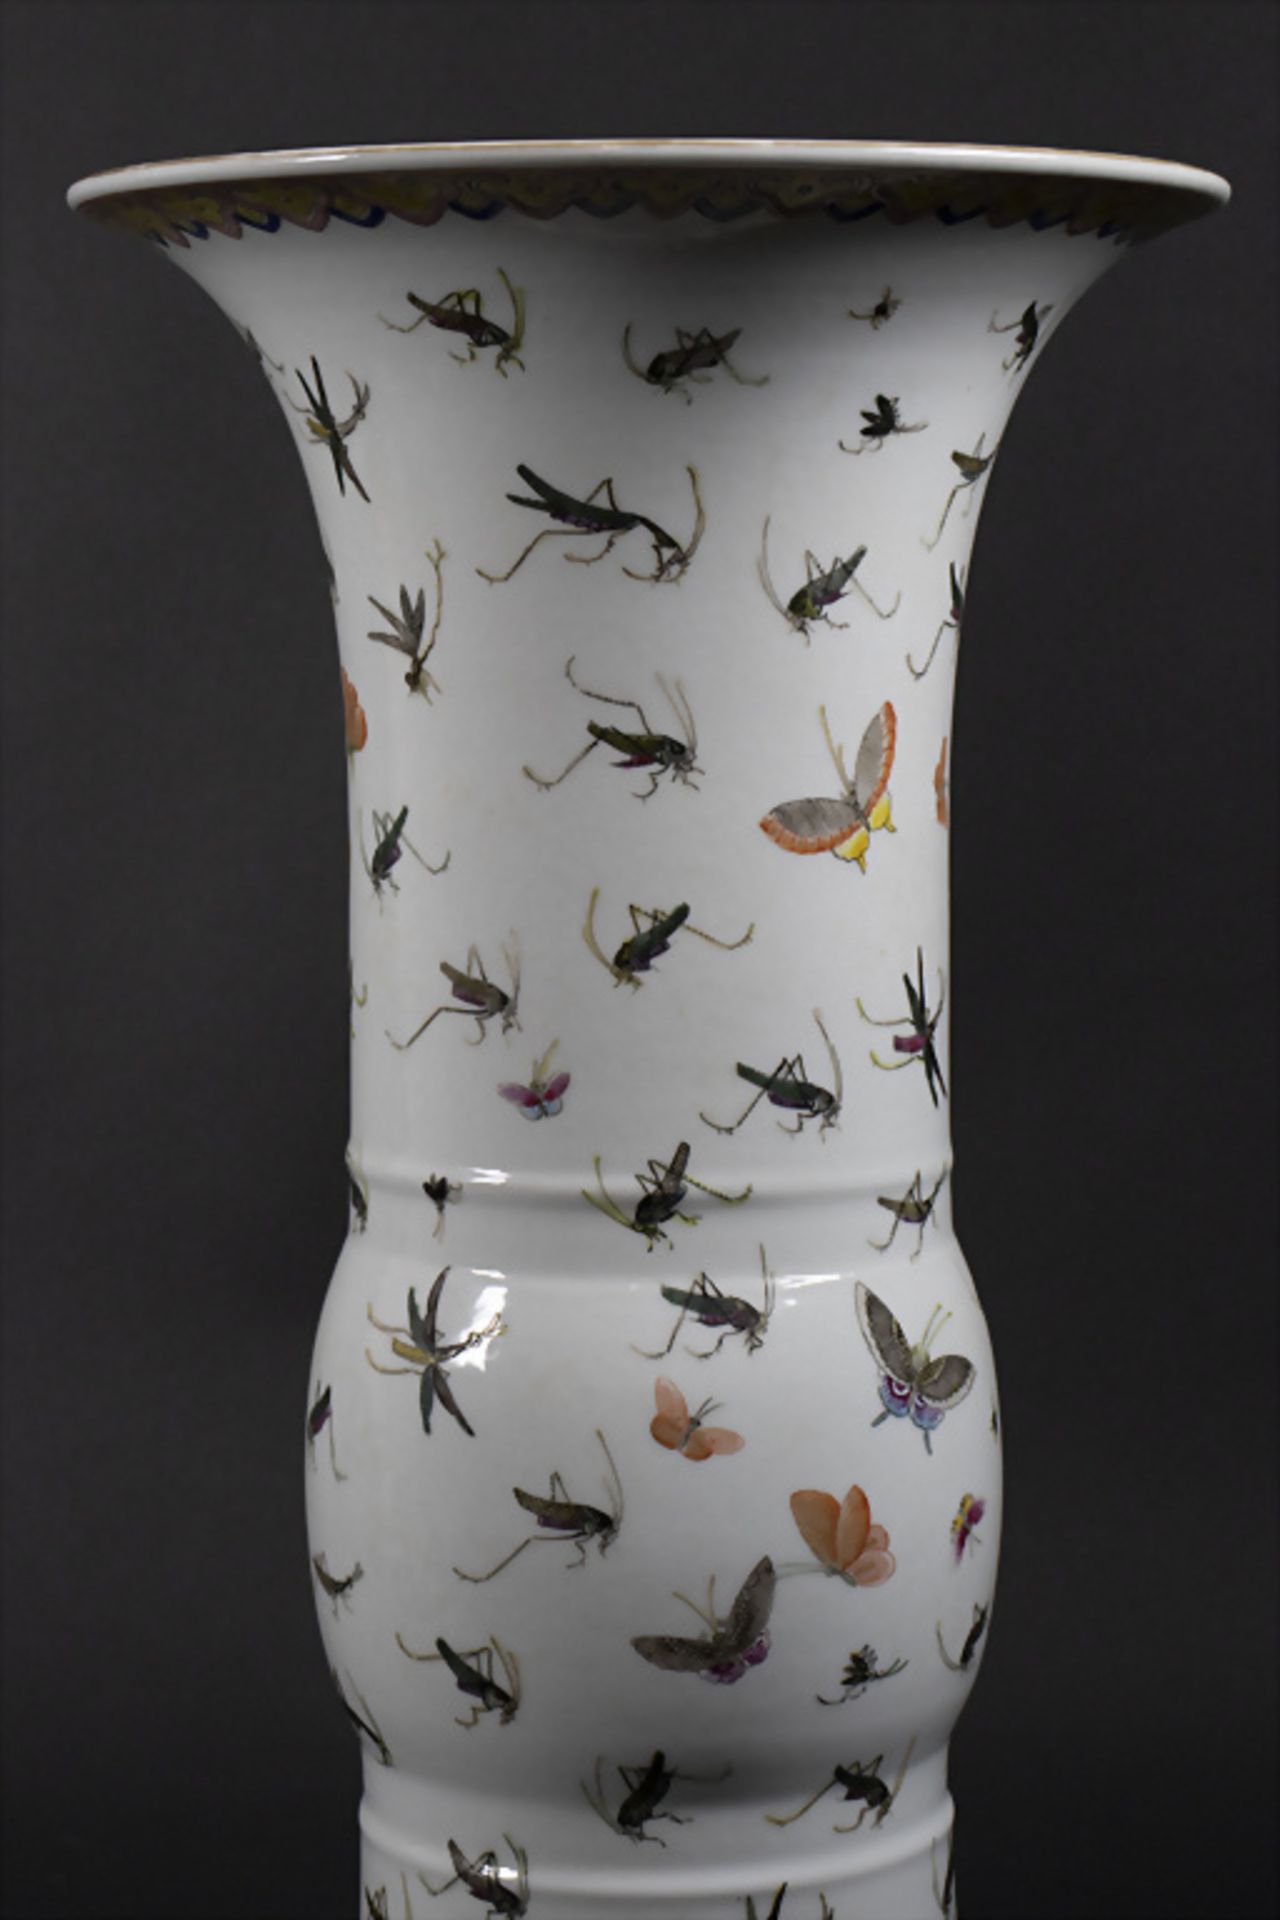 Porzellanvase mit Insekten in Gu Form / A GU shaped porcelain vase wih insects, China, 19./20. Jh. - Image 4 of 9